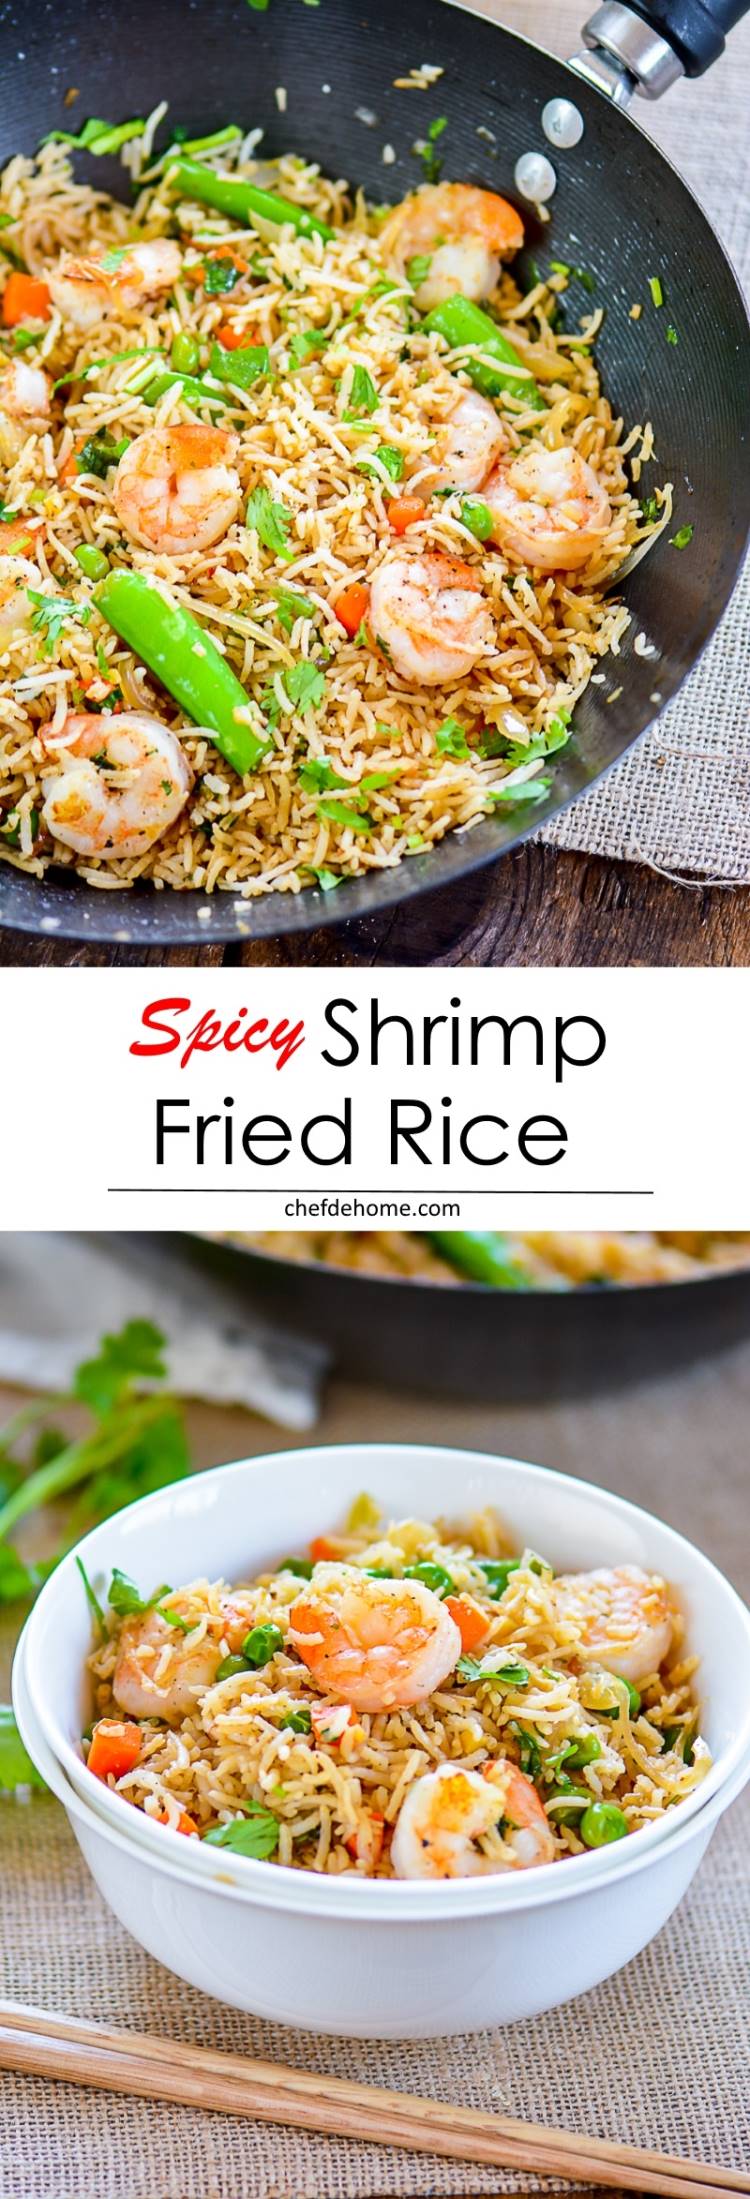 Spicy Quick and Loaded with vegetables Shrimp Fried Rice ready in just 15 minutes for a easy Asian dinner at home | chefdehome.com